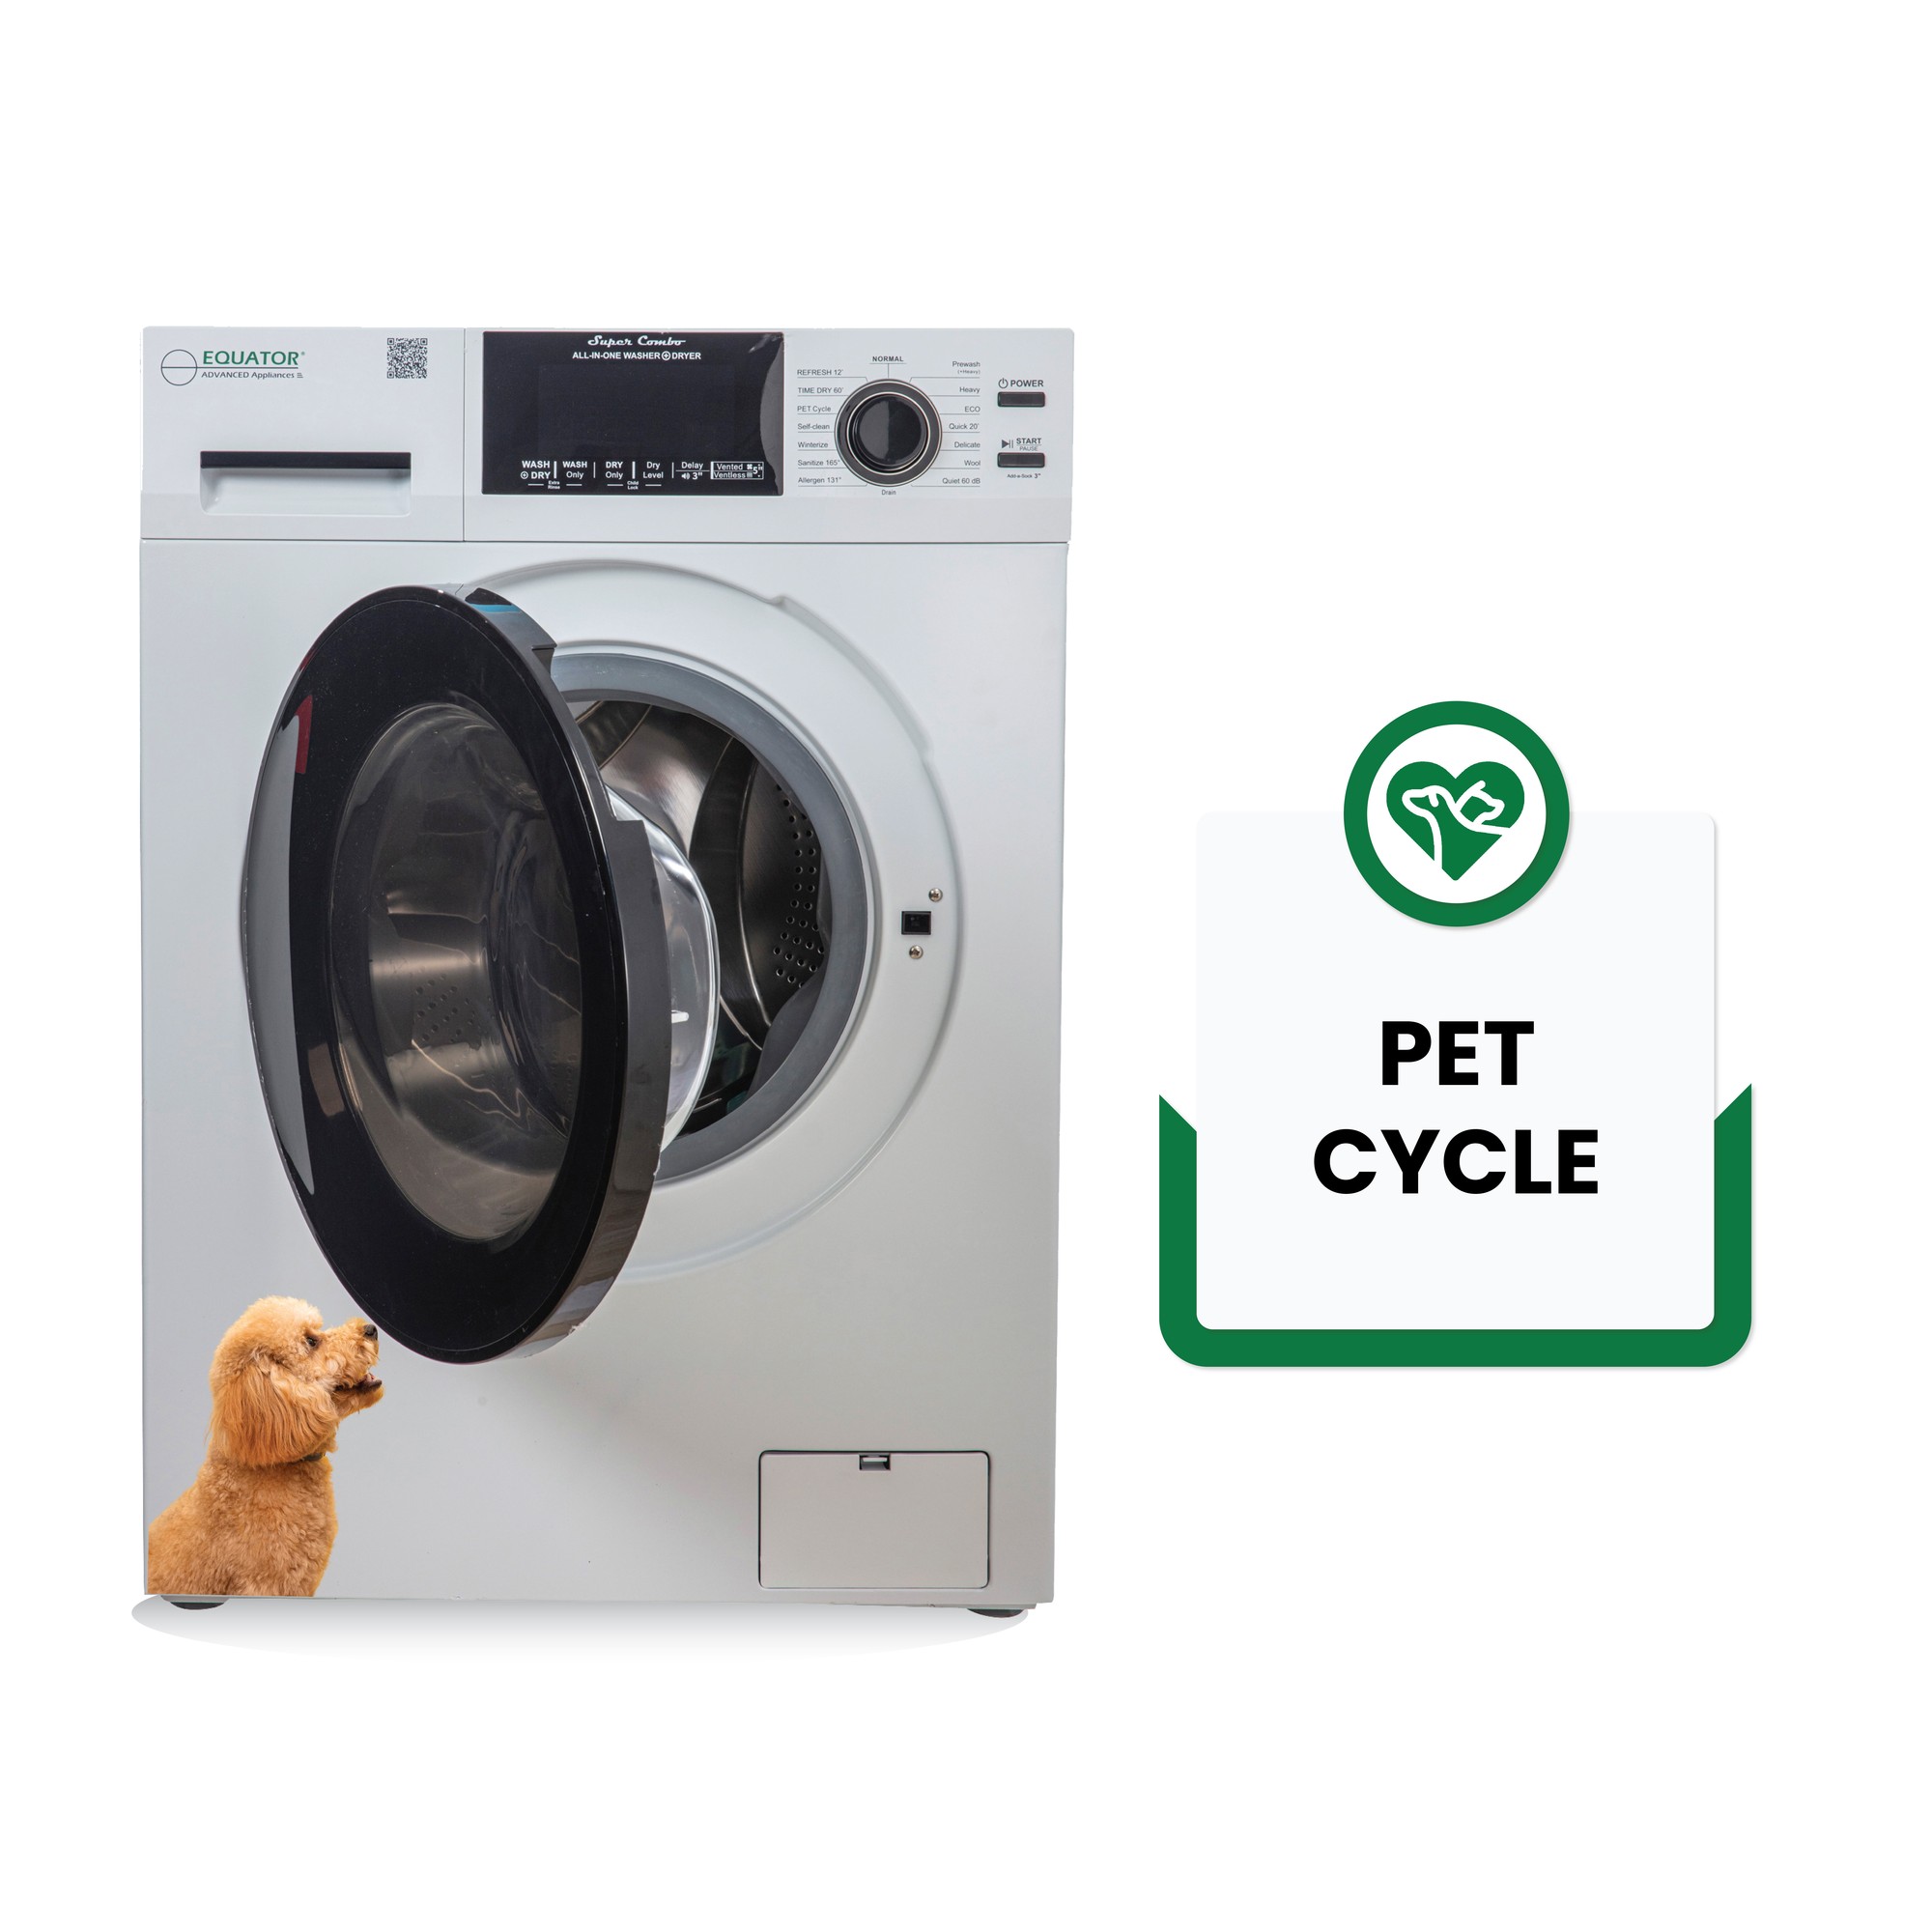 Equator Pet Compact 110V Vented/Ventless 15 lbs Sani Combo Washer Dryer 1400 RPM(White)